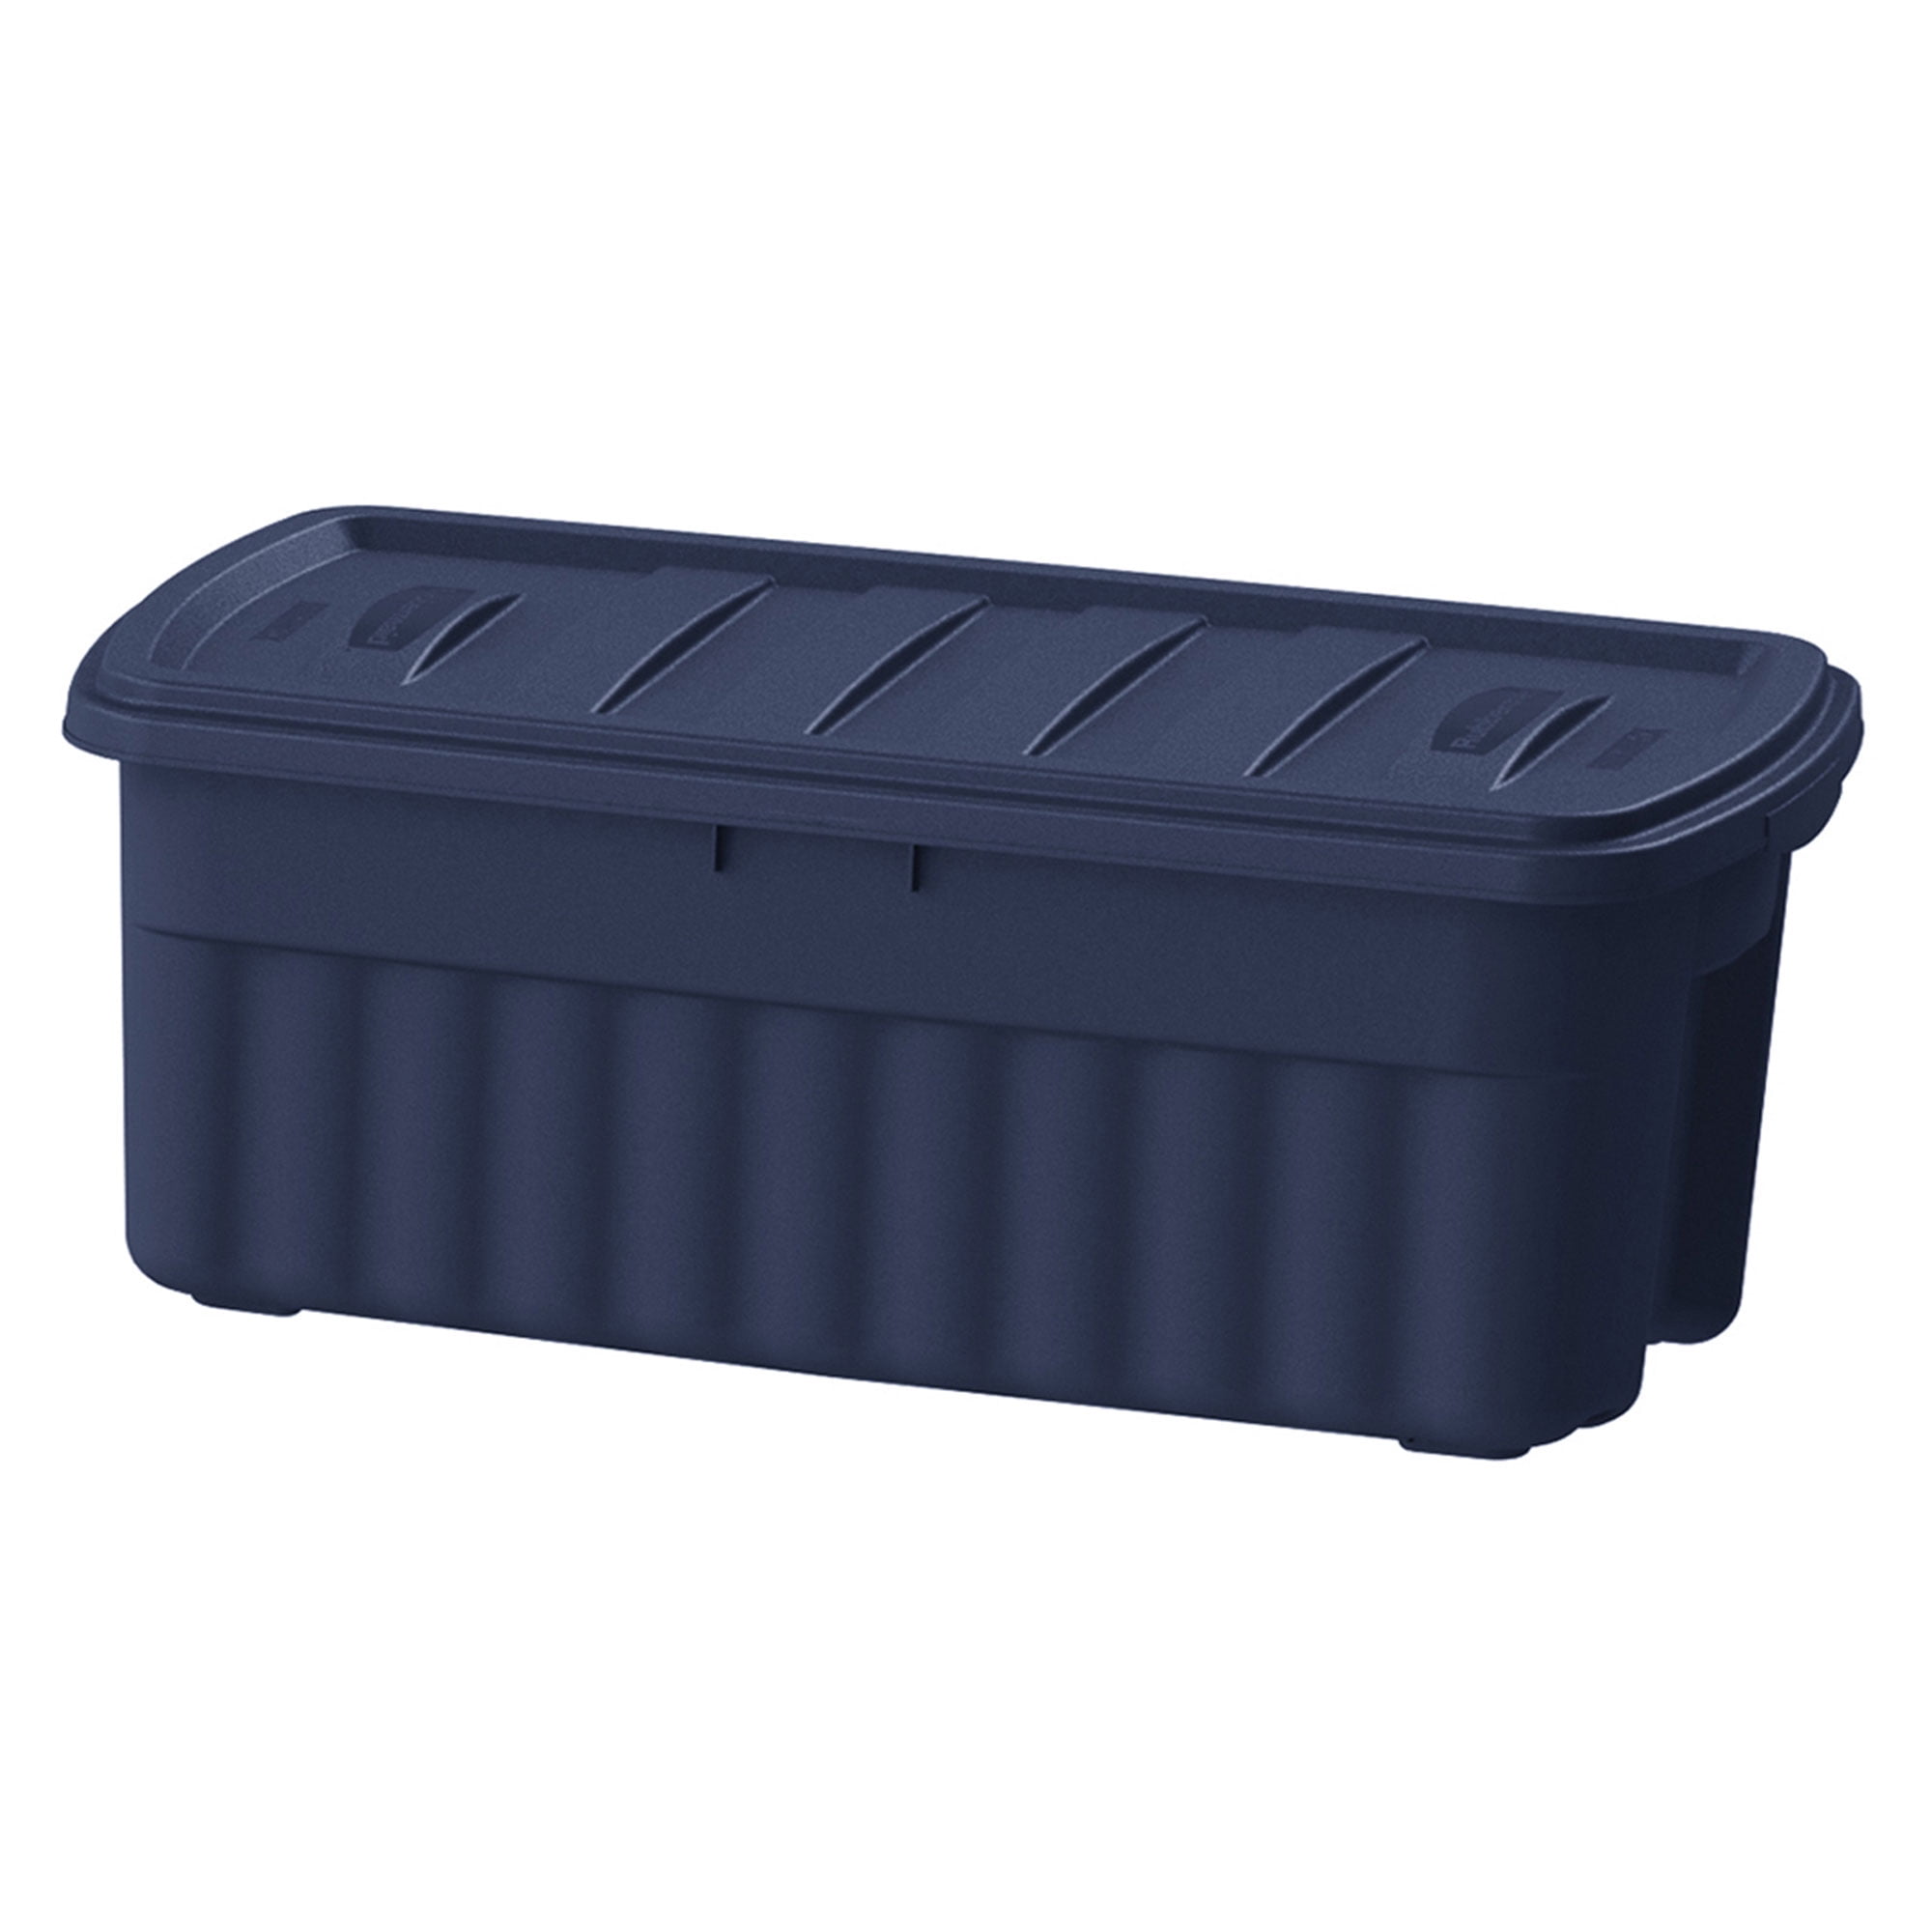 CleverMade 12.15 Gallon Collapsible Plastic Storage Bin, Green and